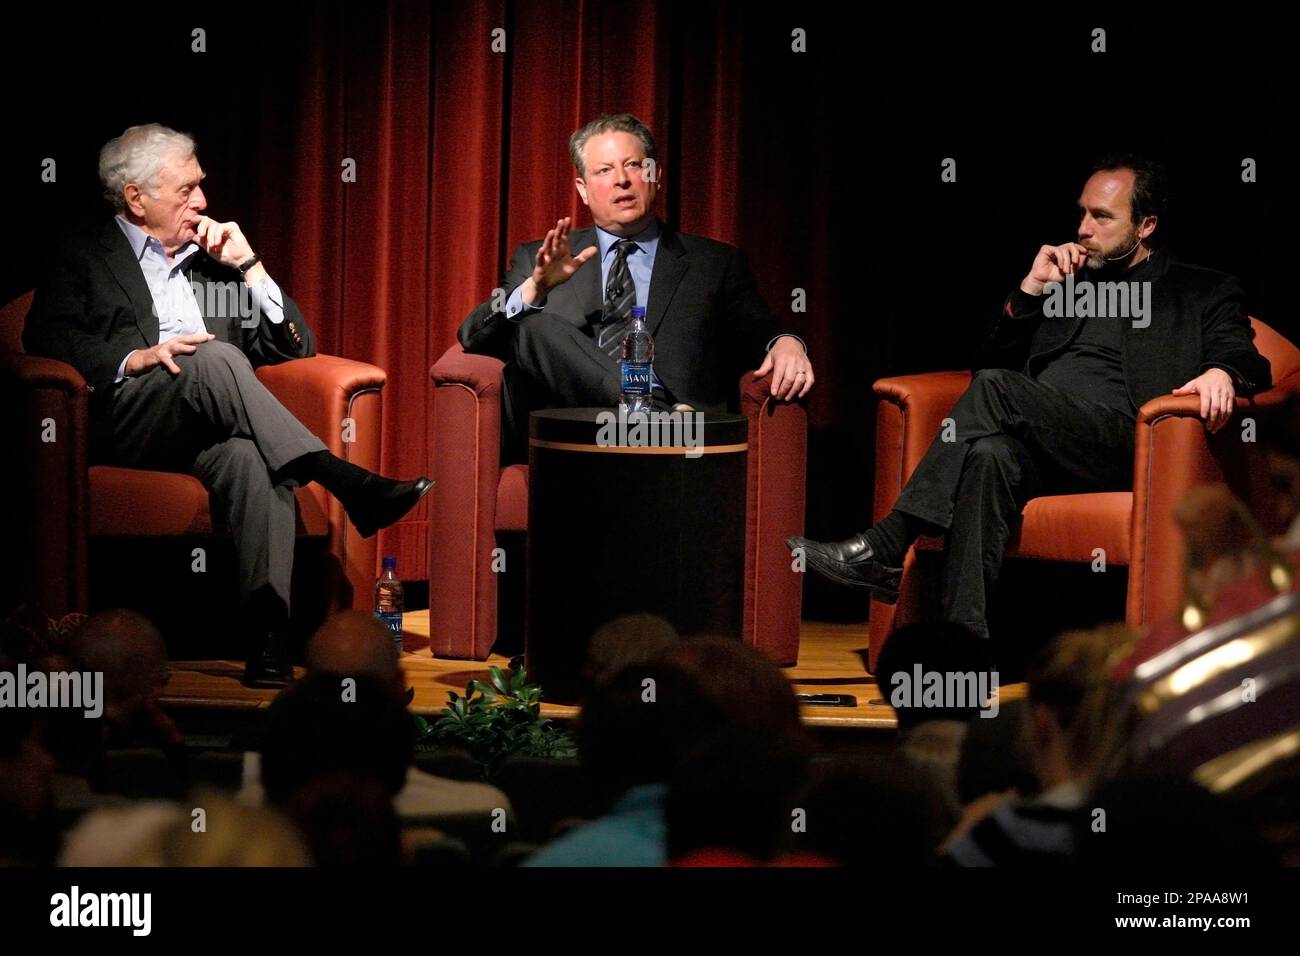 Former Vice President Al Gore, center, talks as part of a round-table  discussion with vetran journalist John Seigenthaler, left, and Wikipedia  founder Jimmy Wales, right, during an event called Accuracy, Privacy and